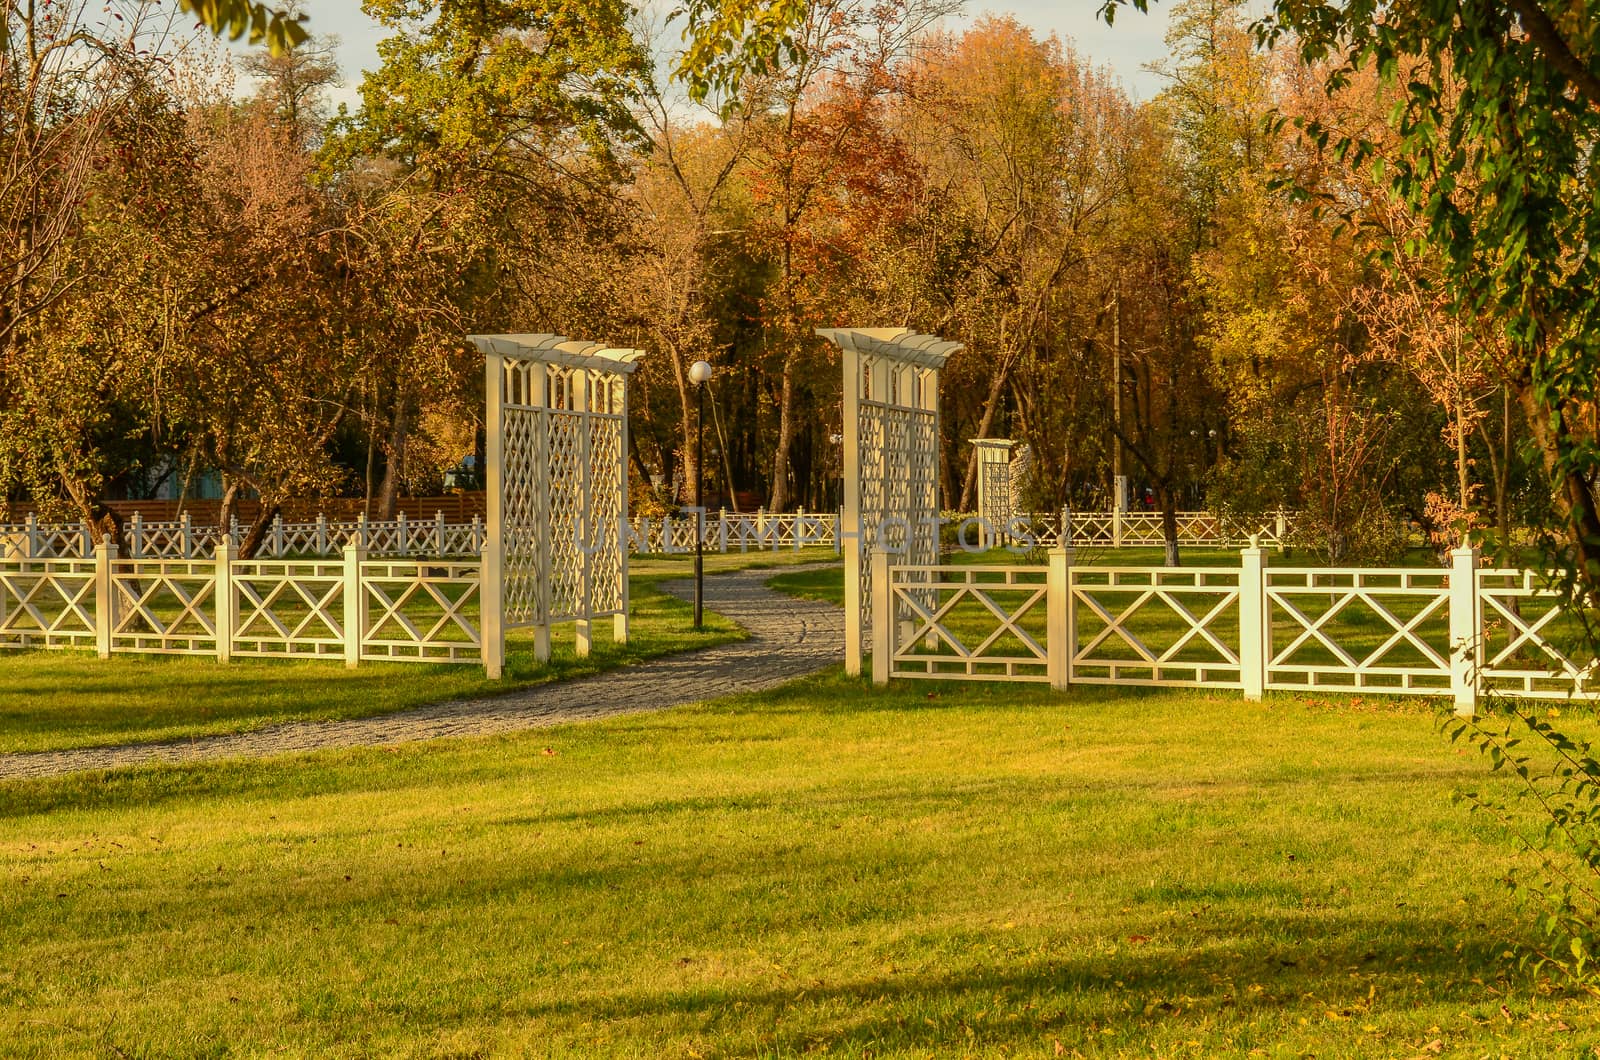 white wooden fence and green lawn in the autumn park by chernobrovin